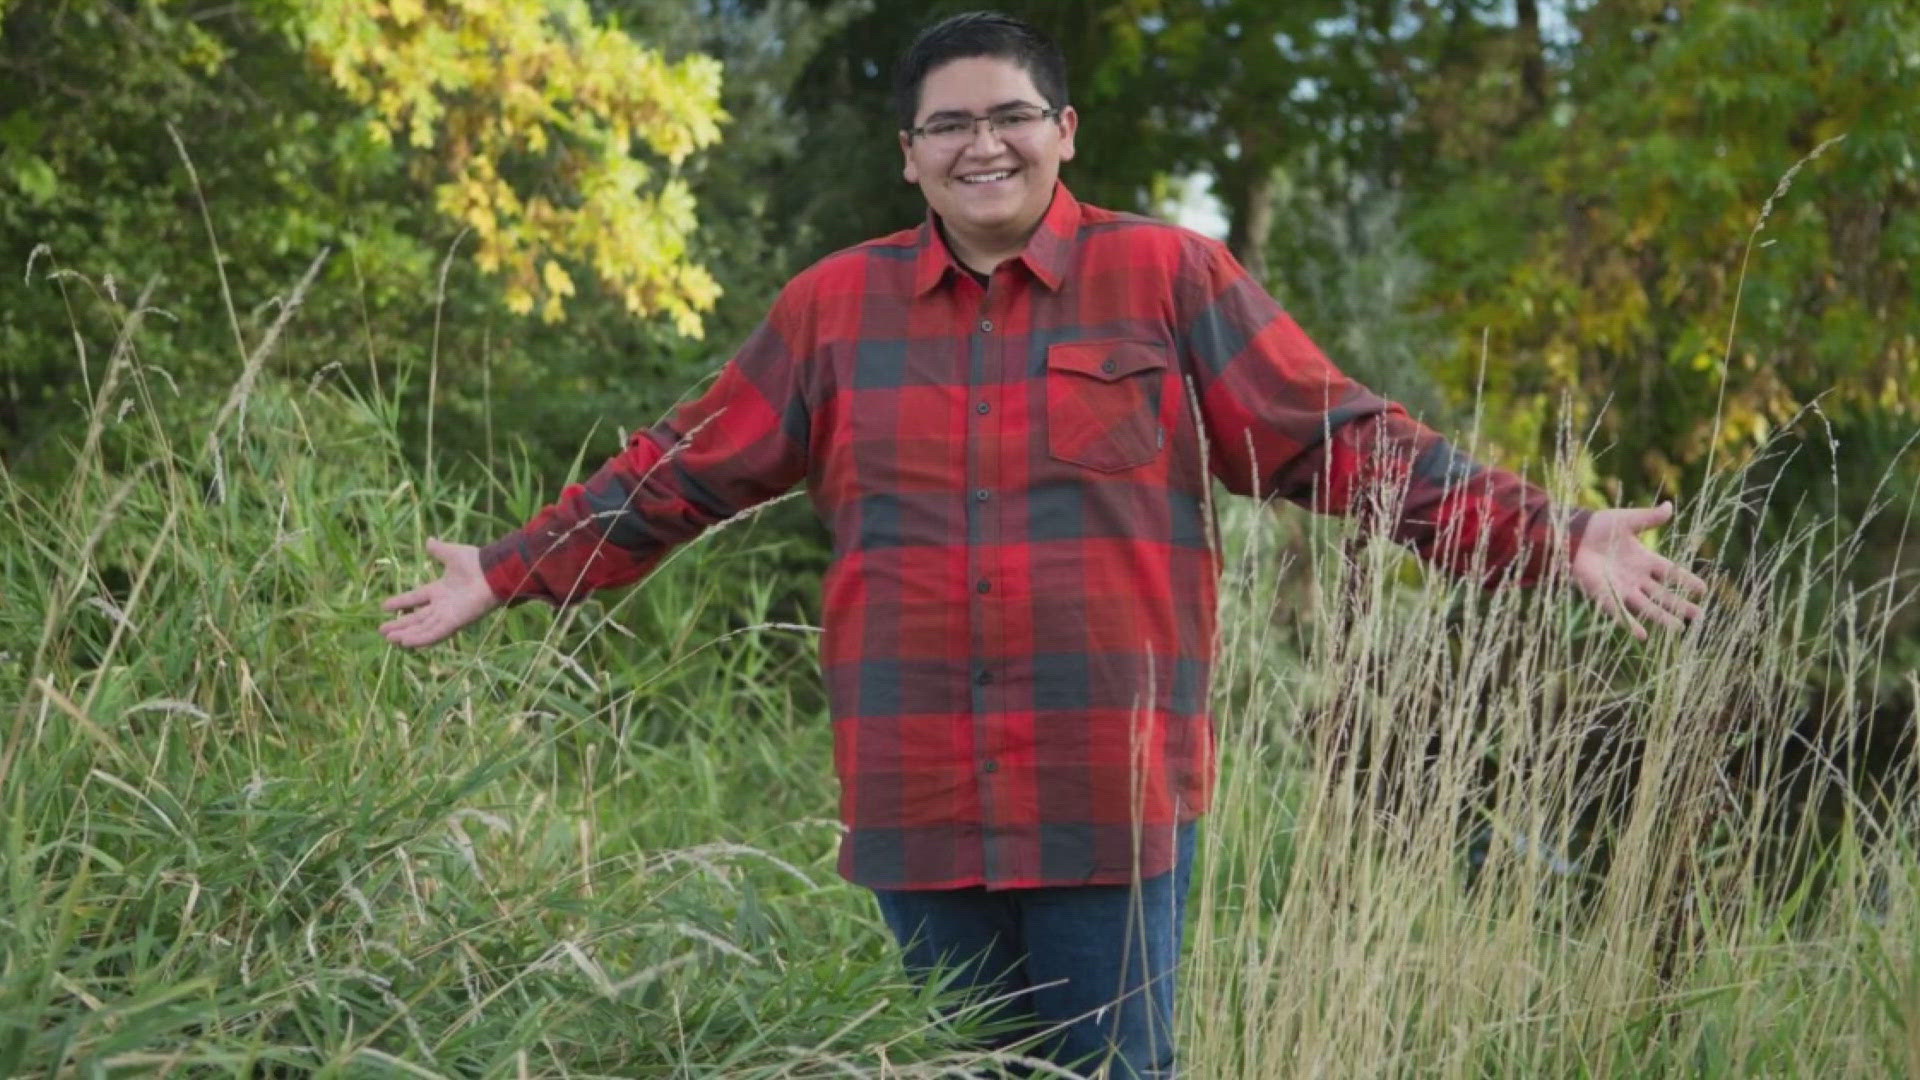 High school senior Kendrick Castillo died saving his classmates when he lunged at one of the shooters that opened fire inside STEM School Highlands Ranch.